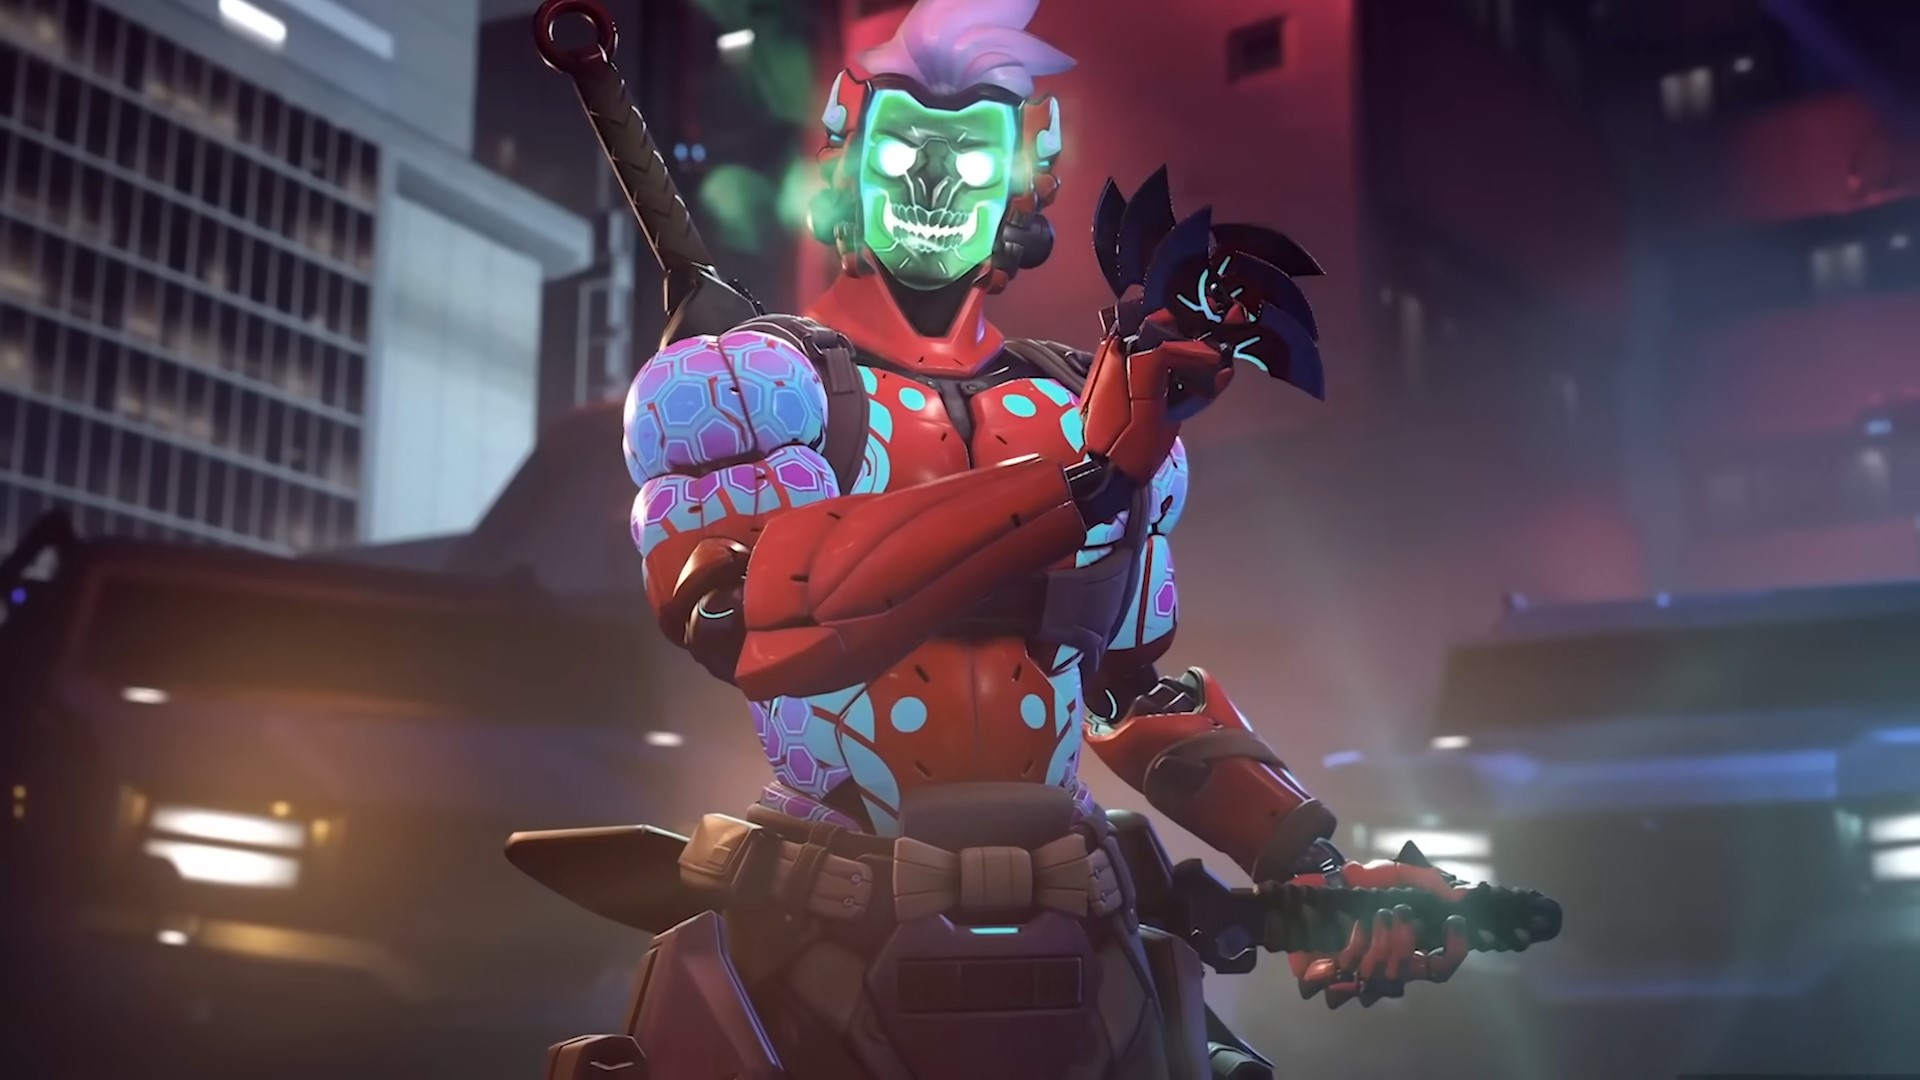  Overwatch 2 Halloween event: Start date, characters, and skins 